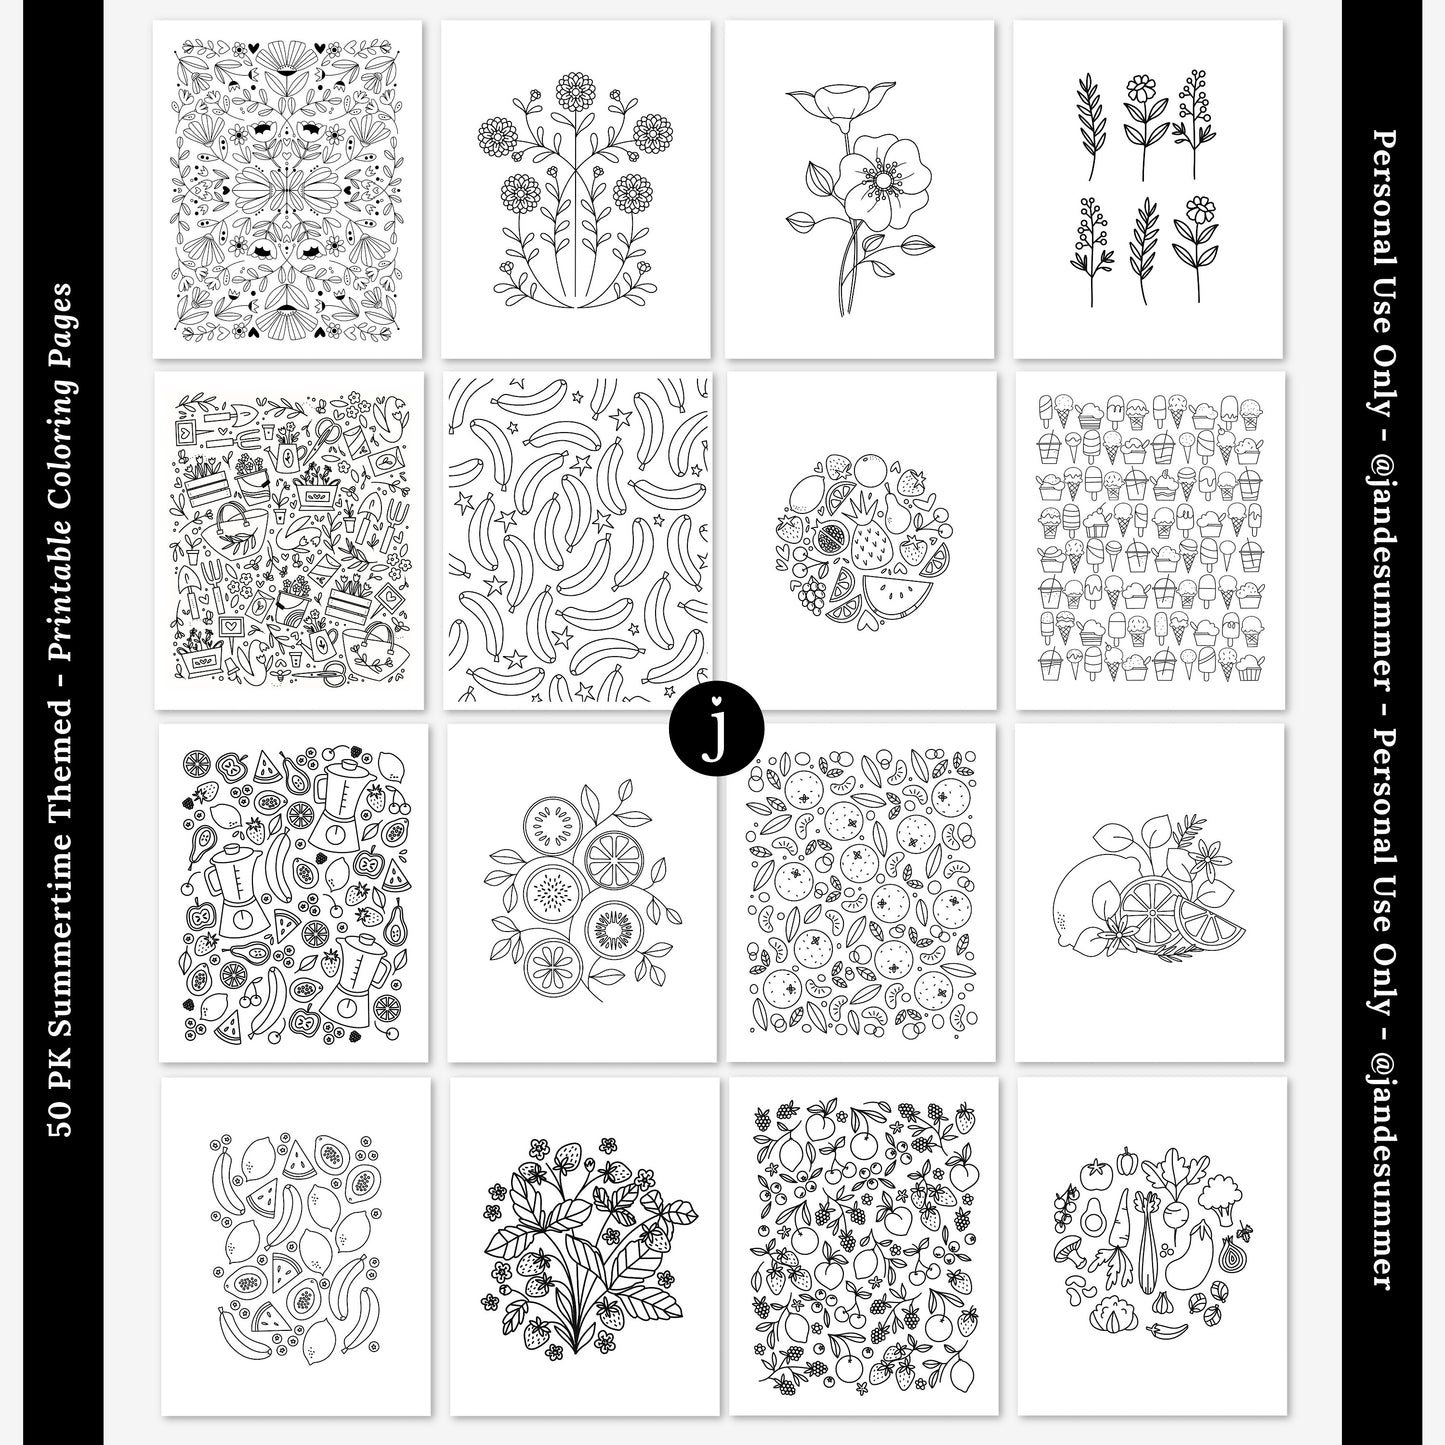 50 Pk Summertime Printable Coloring Pages | Hand Illustrated Ocean Tropical Flower Fishing Travel Summer Foods Garden Theme